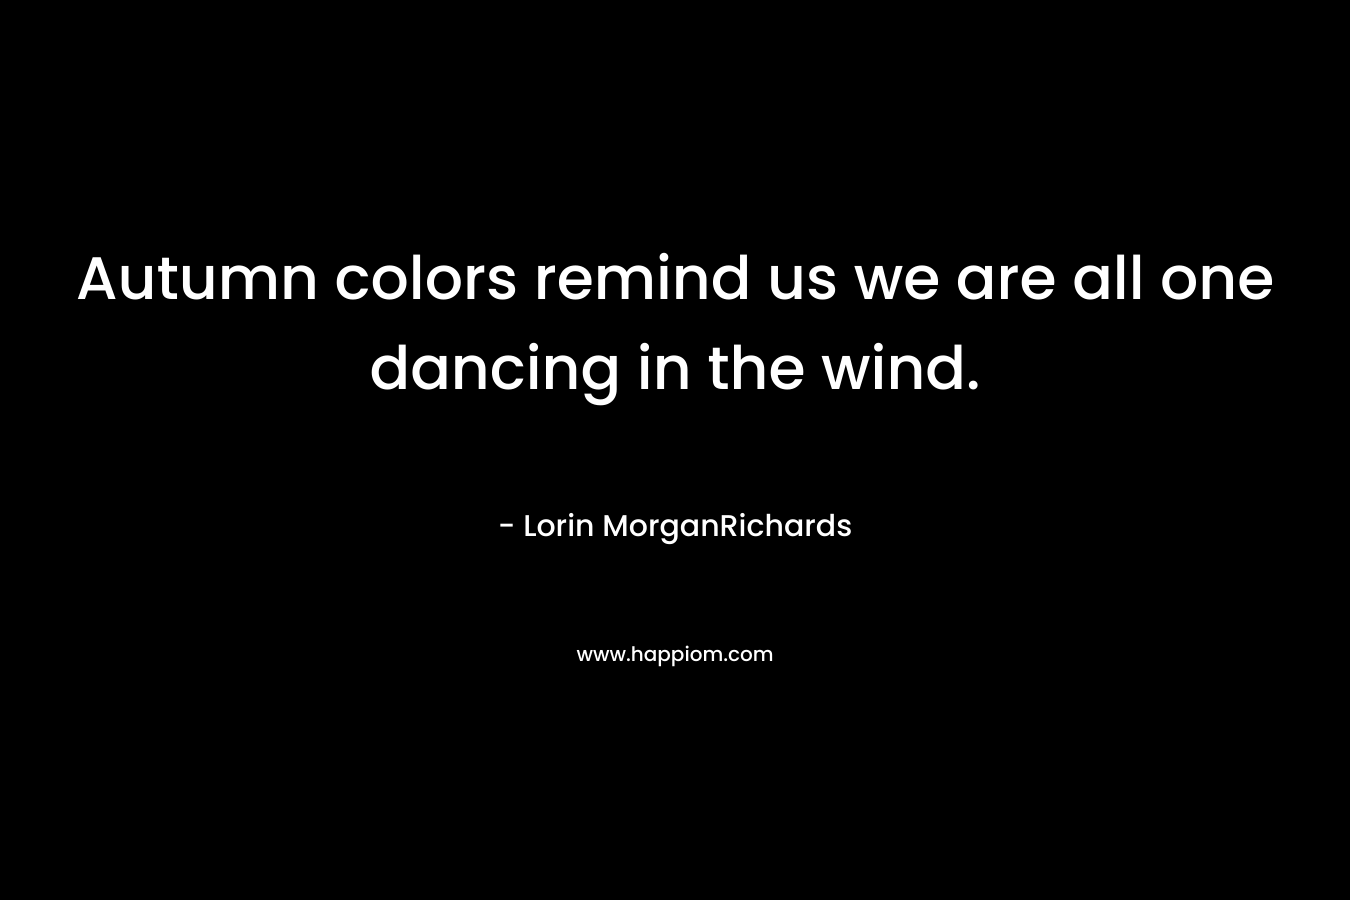 Autumn colors remind us we are all one dancing in the wind. – Lorin MorganRichards